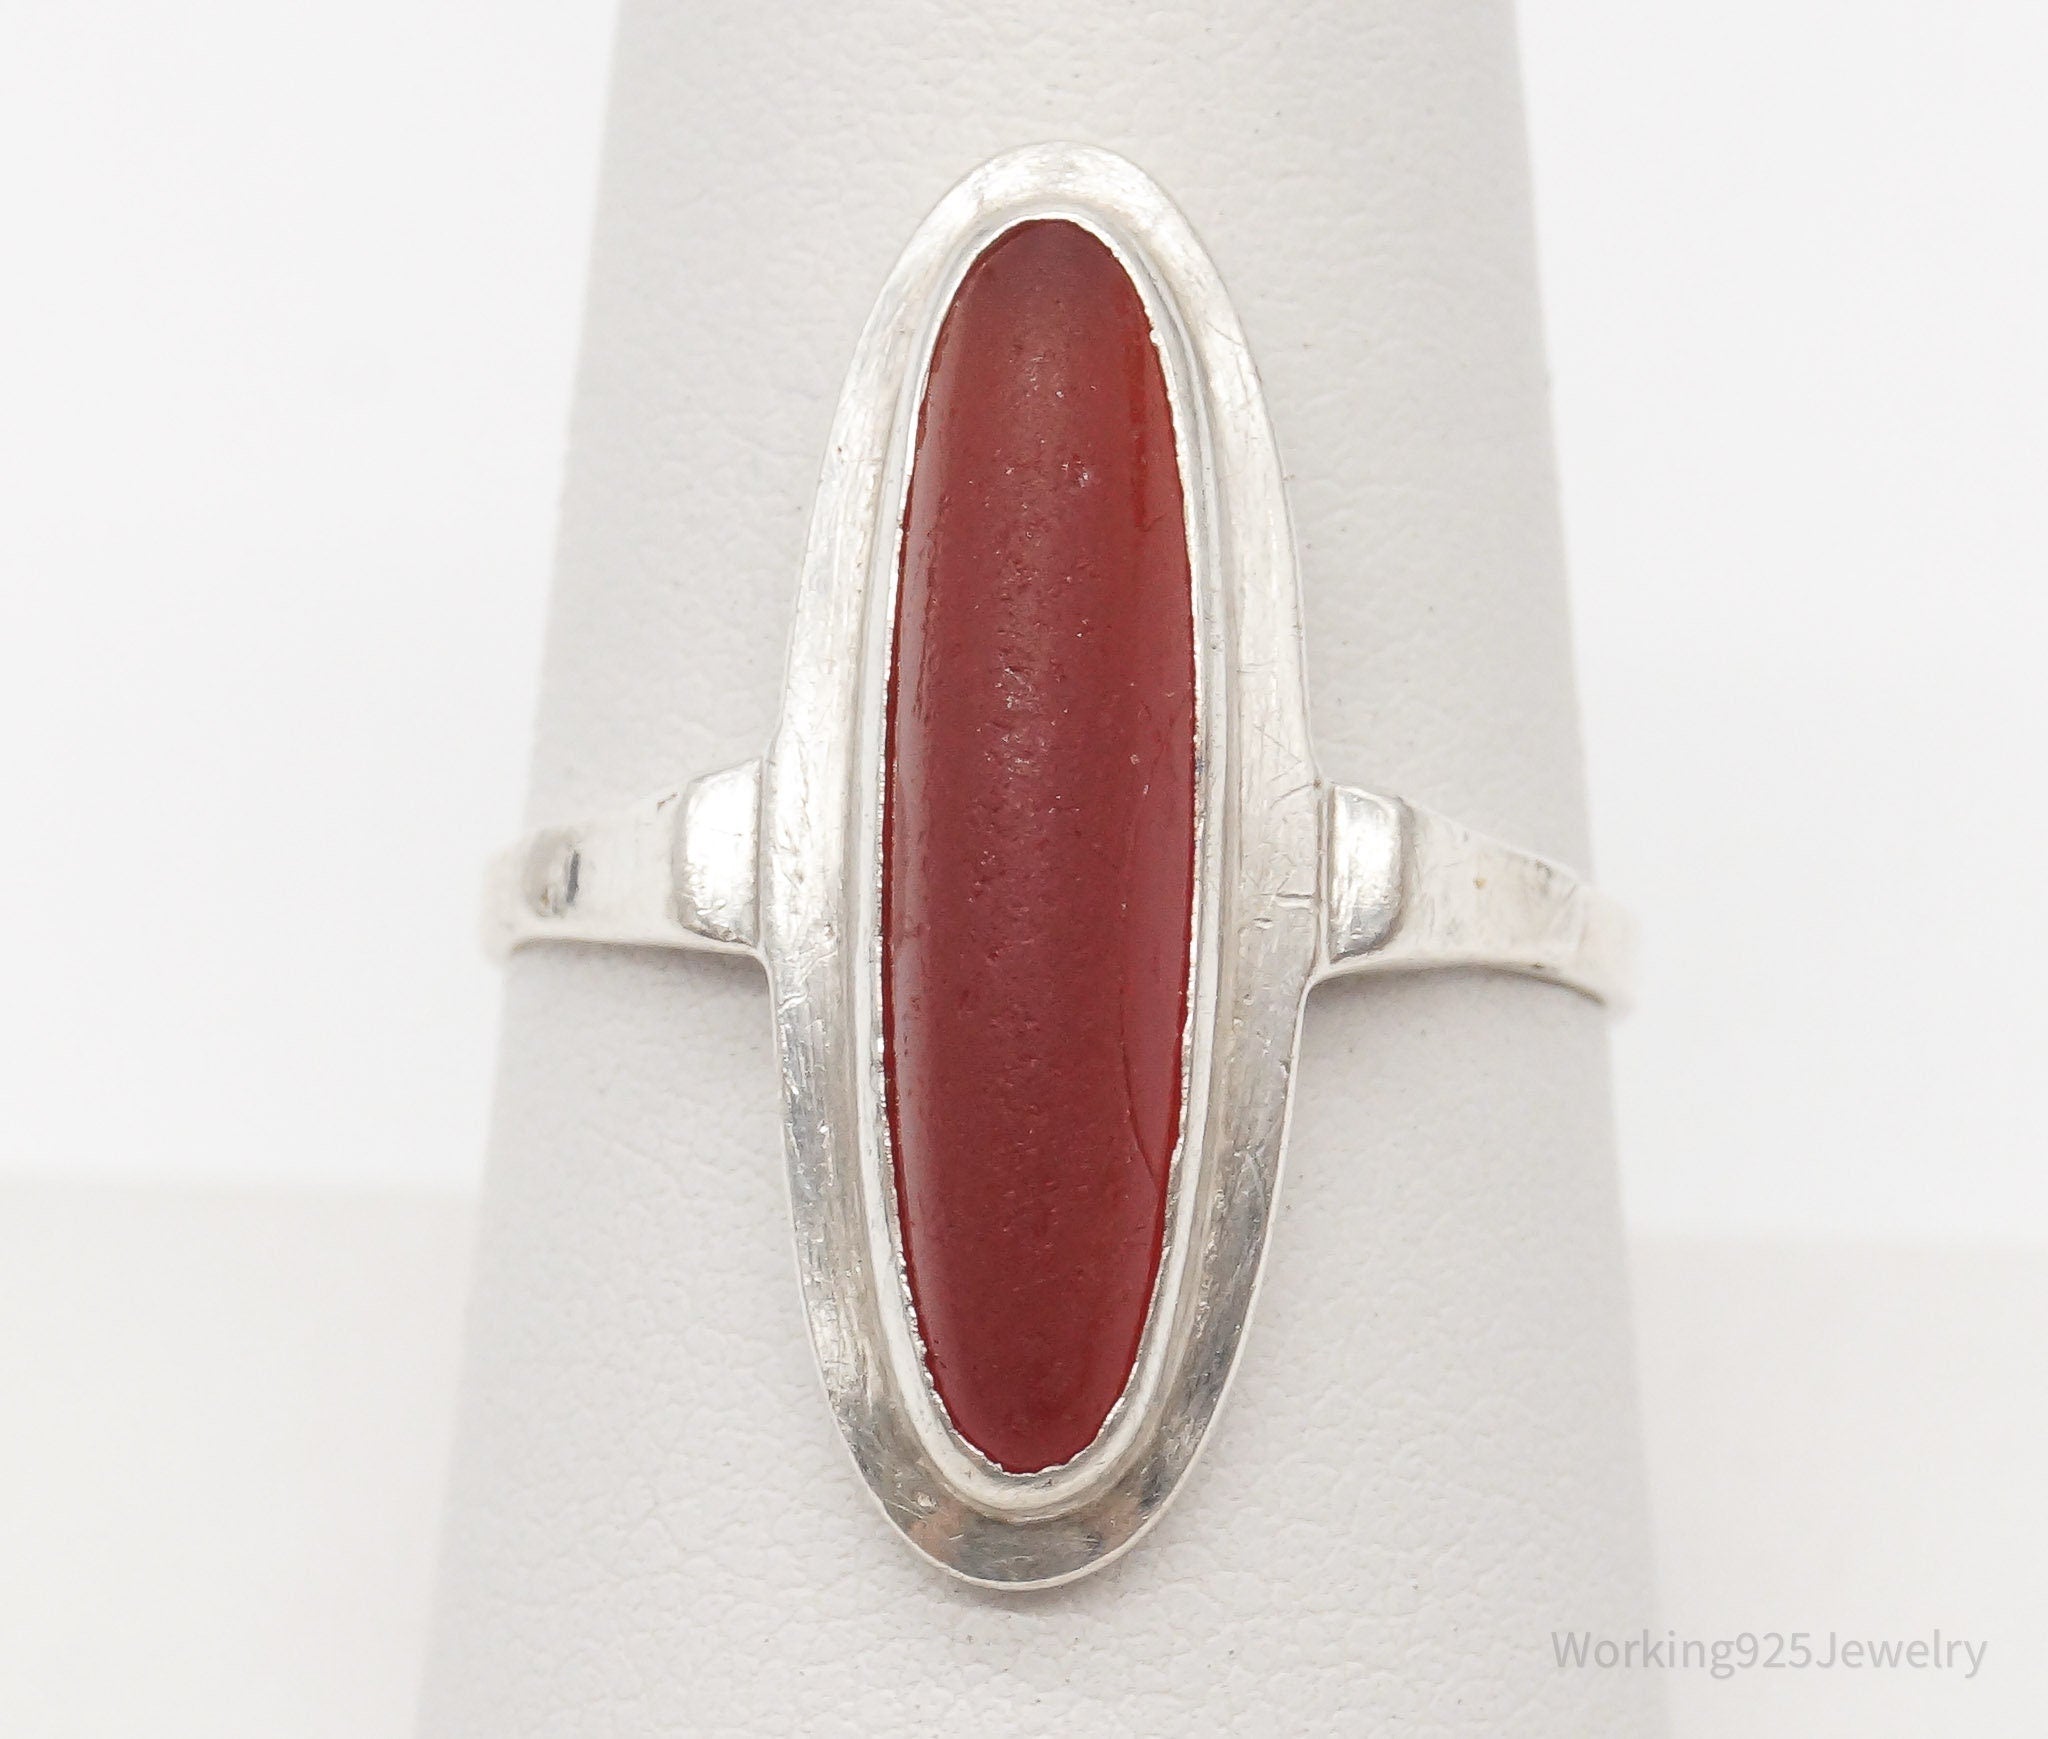 Antique Carnelian 835 Silver Ring - Size 8.25